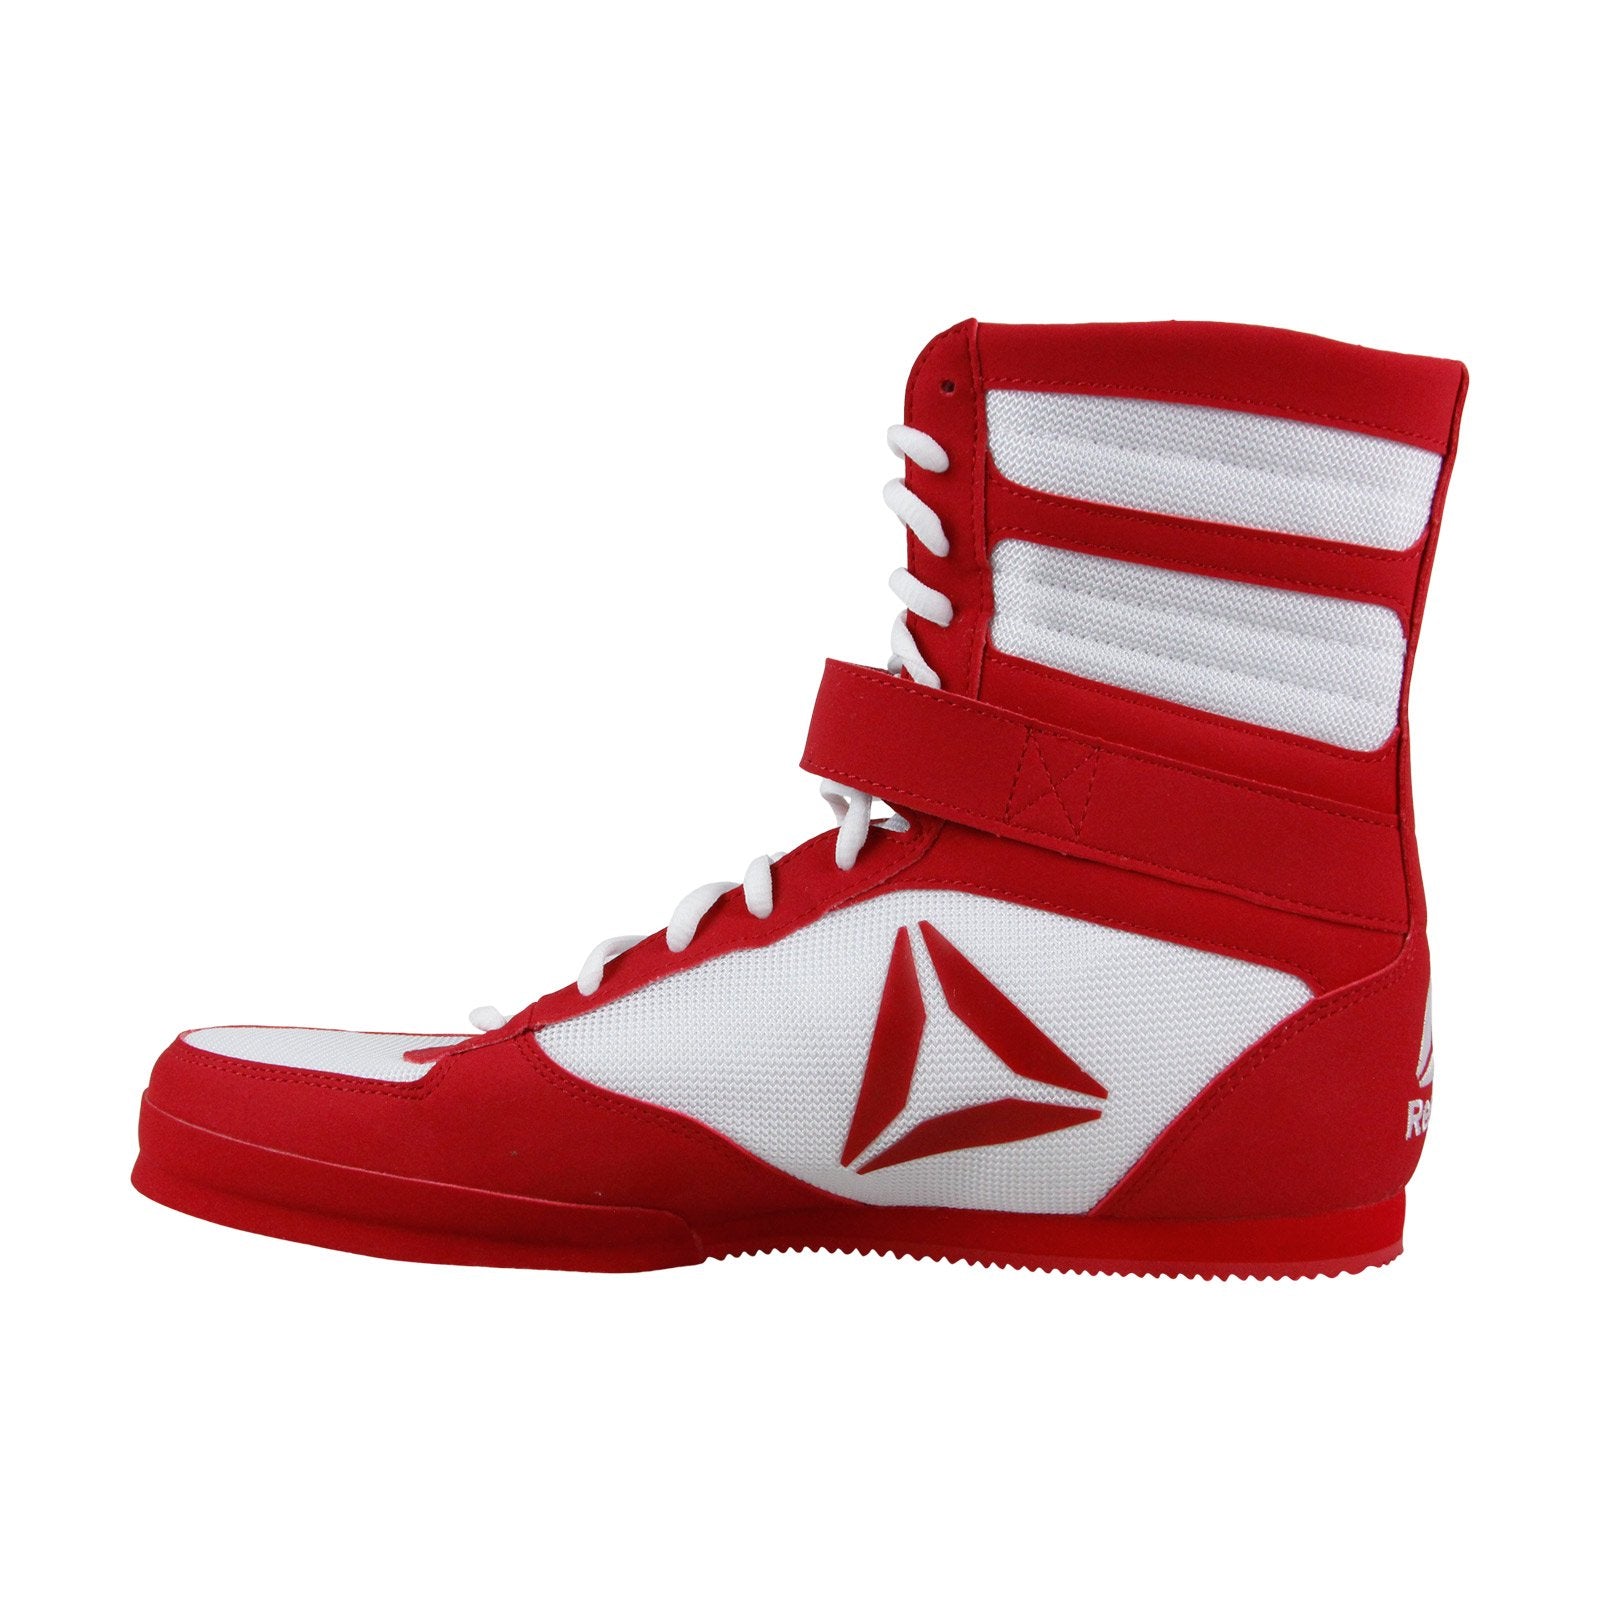 hel Won avond Reebok Boxing Boot- Buck CN4739 Mens Red Canvas Lace Up Athletic Wrest -  Ruze Shoes